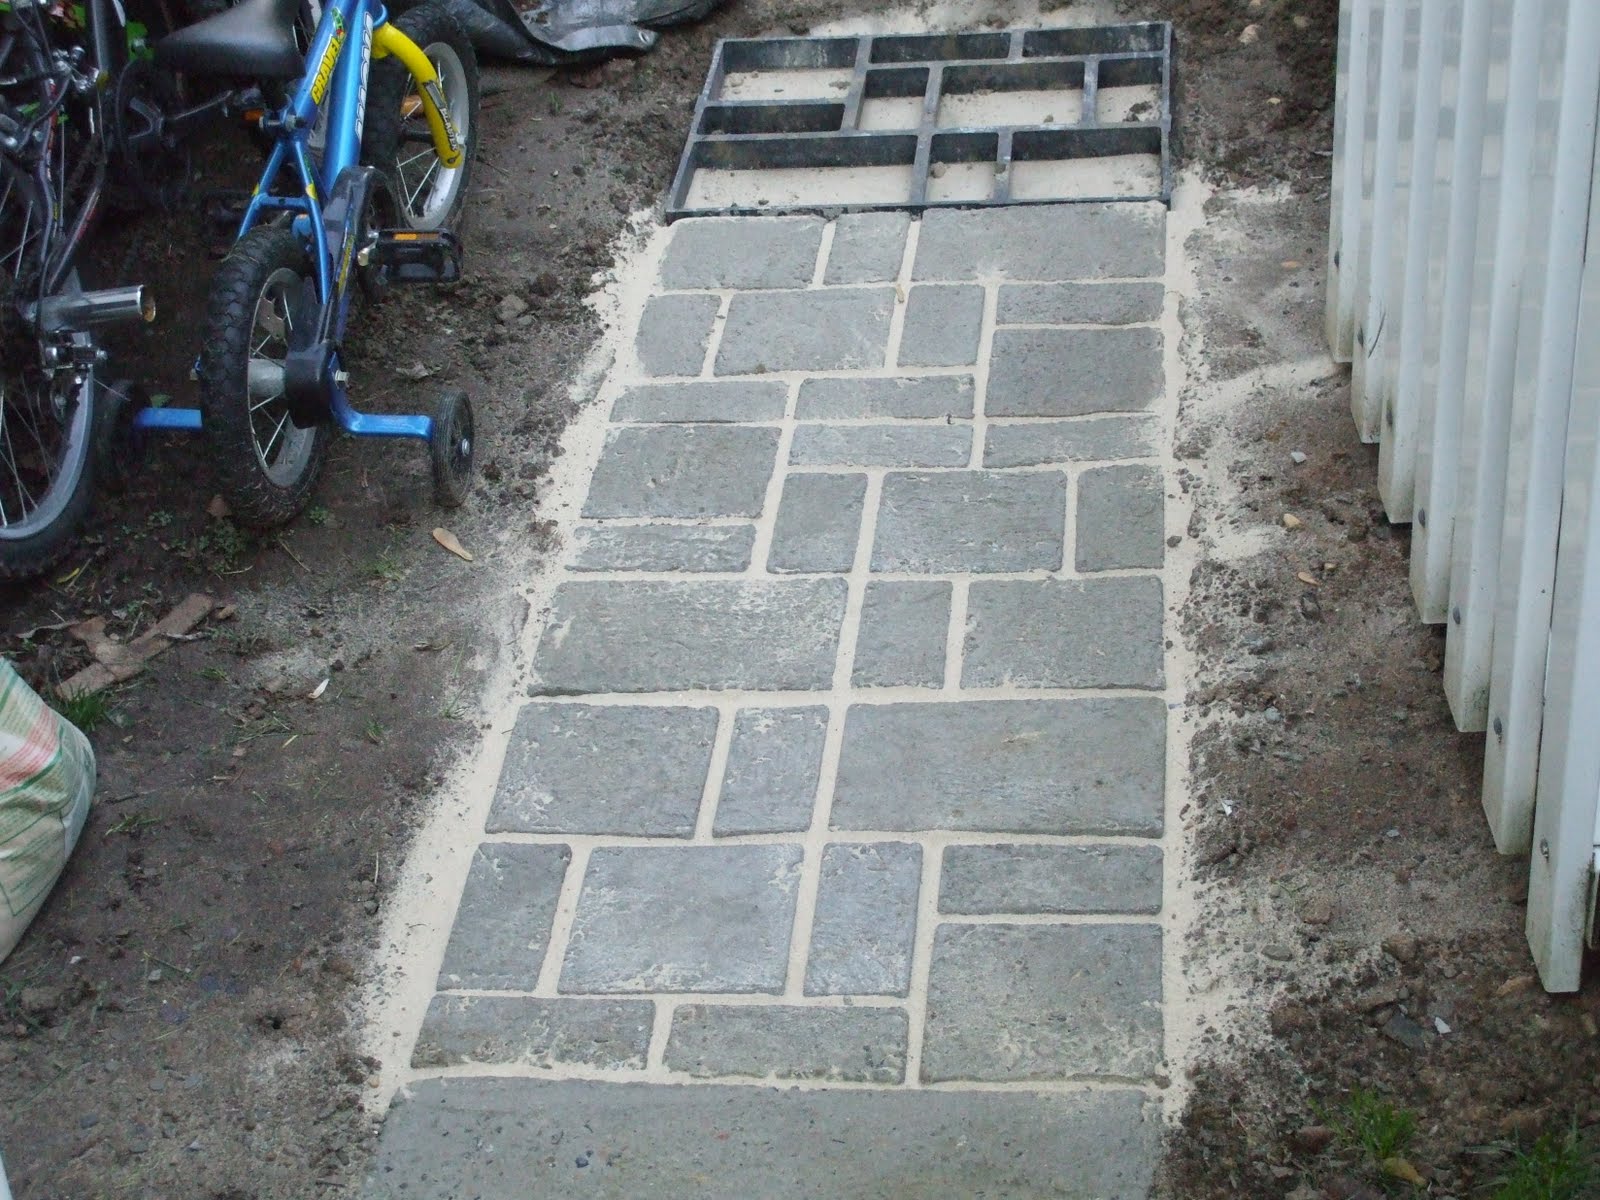 How I keep busy: Brick Cement Walkway for under $100.00